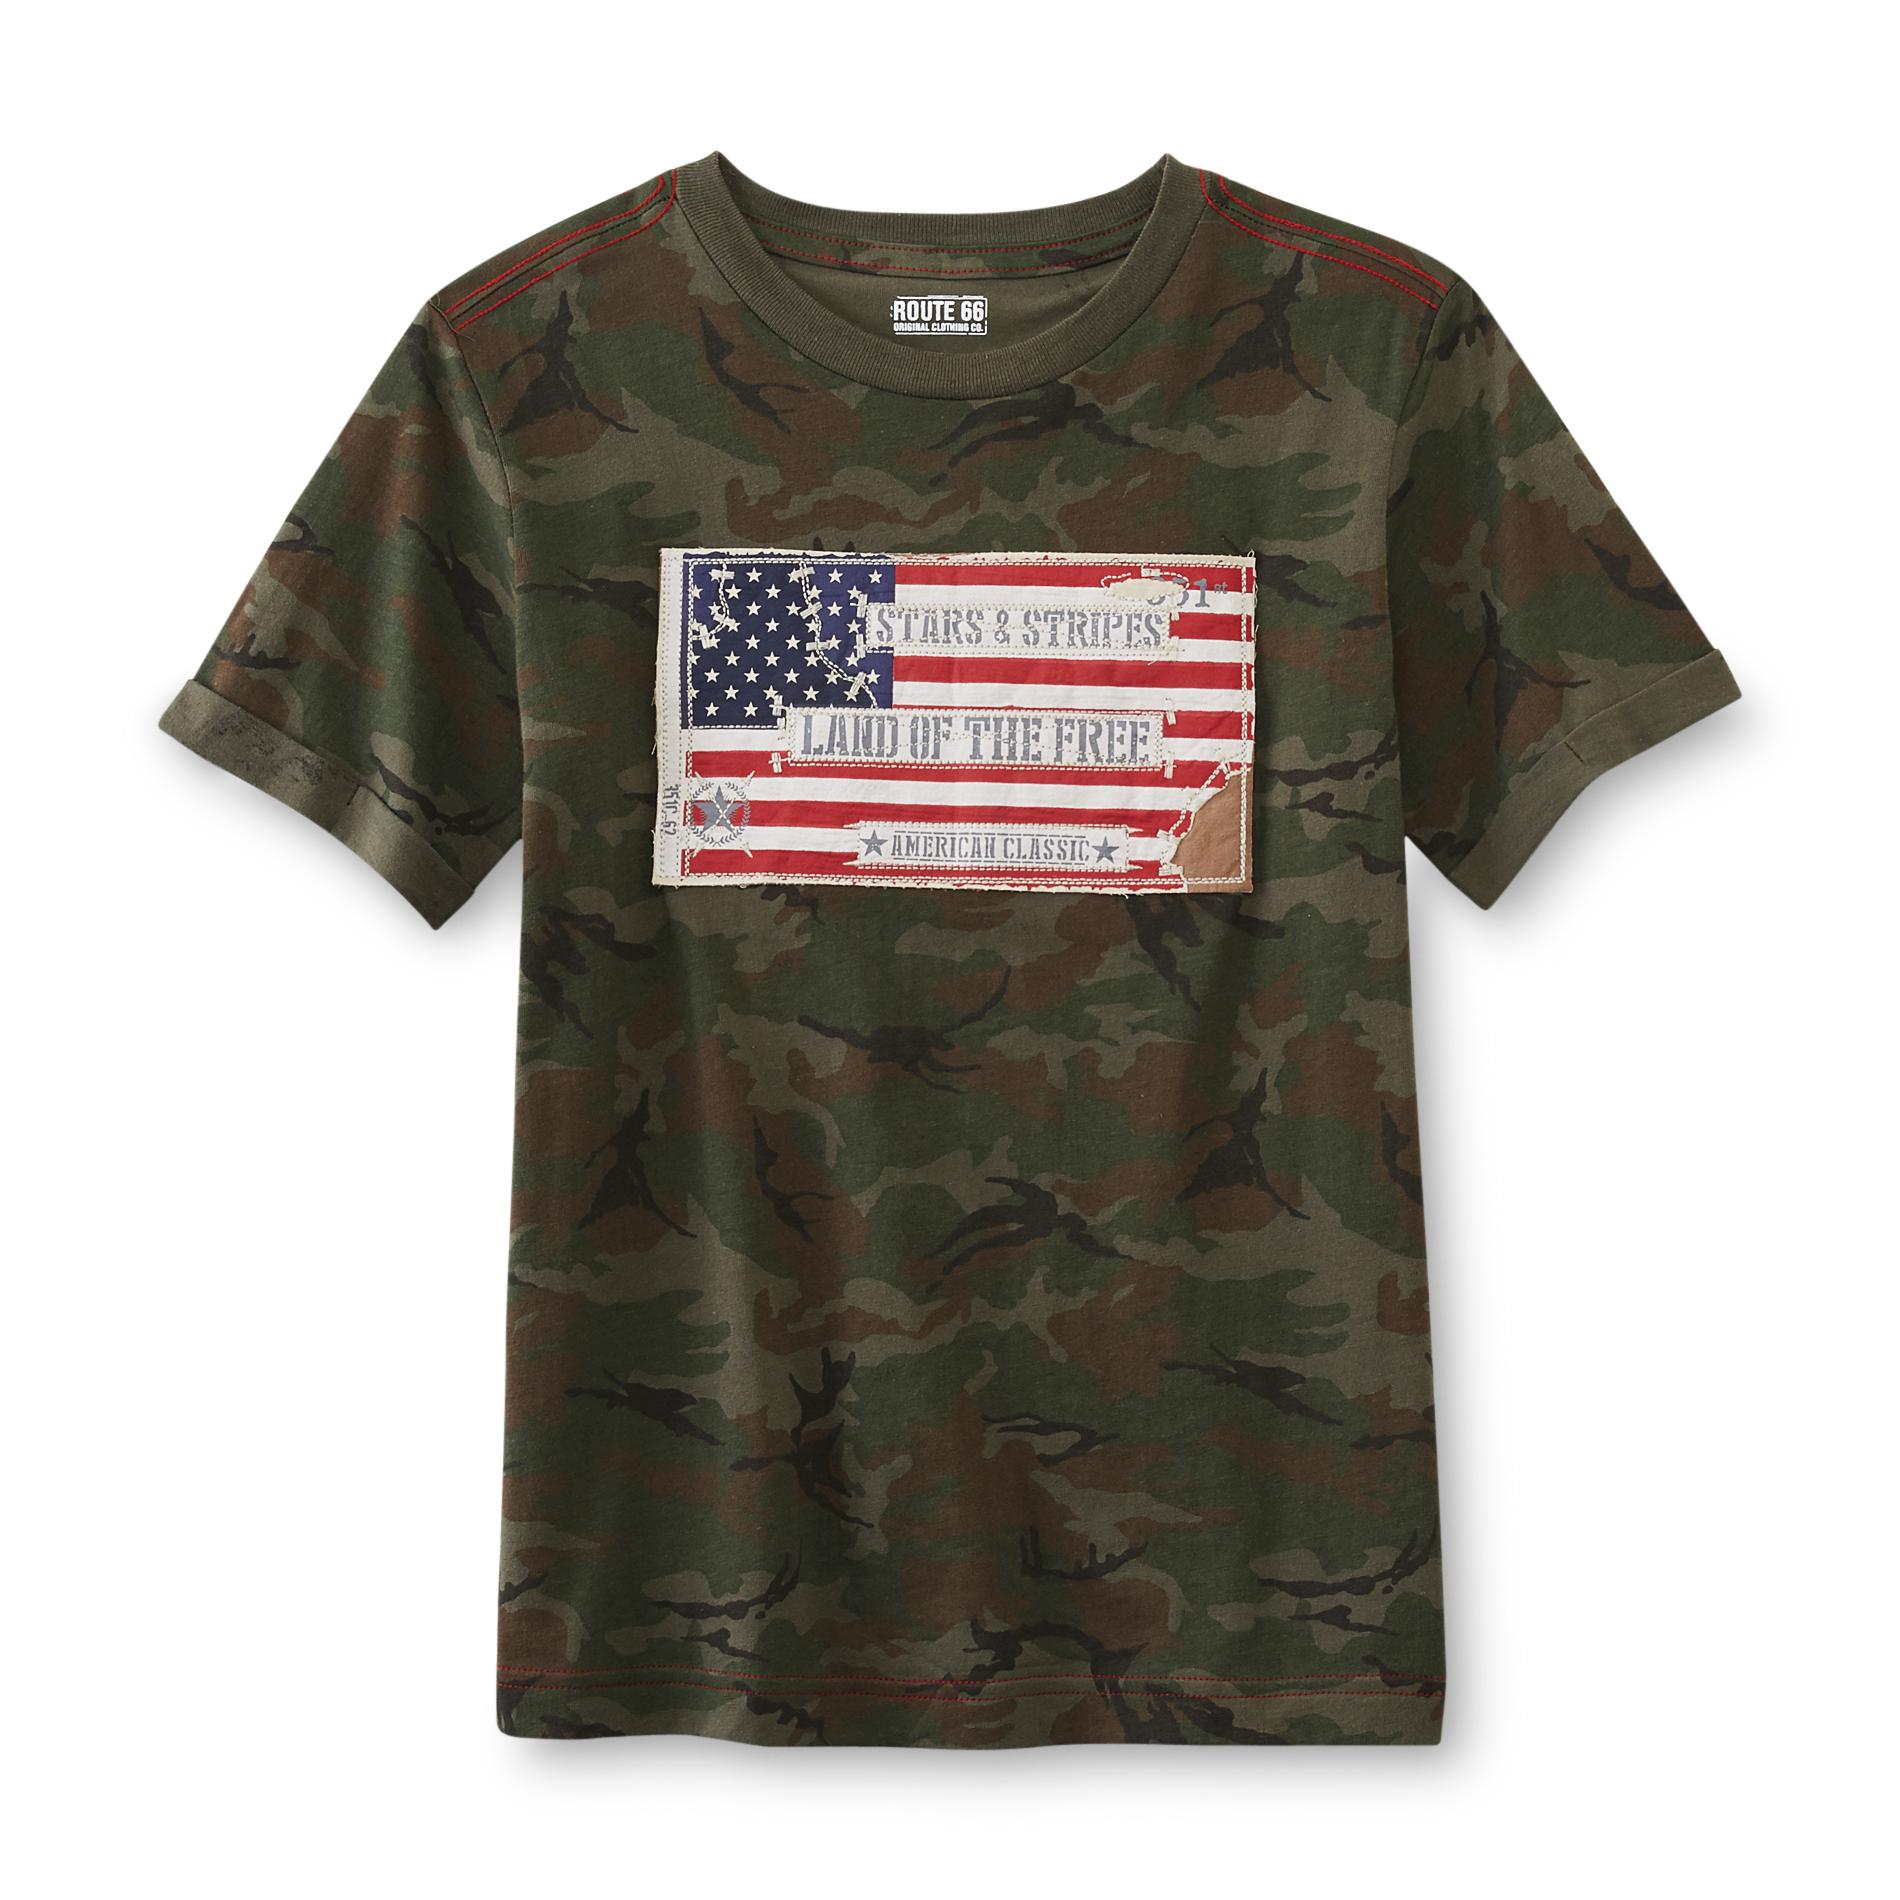 Route 66 Boy's Camouflage T-Shirt - Stars & Stripes